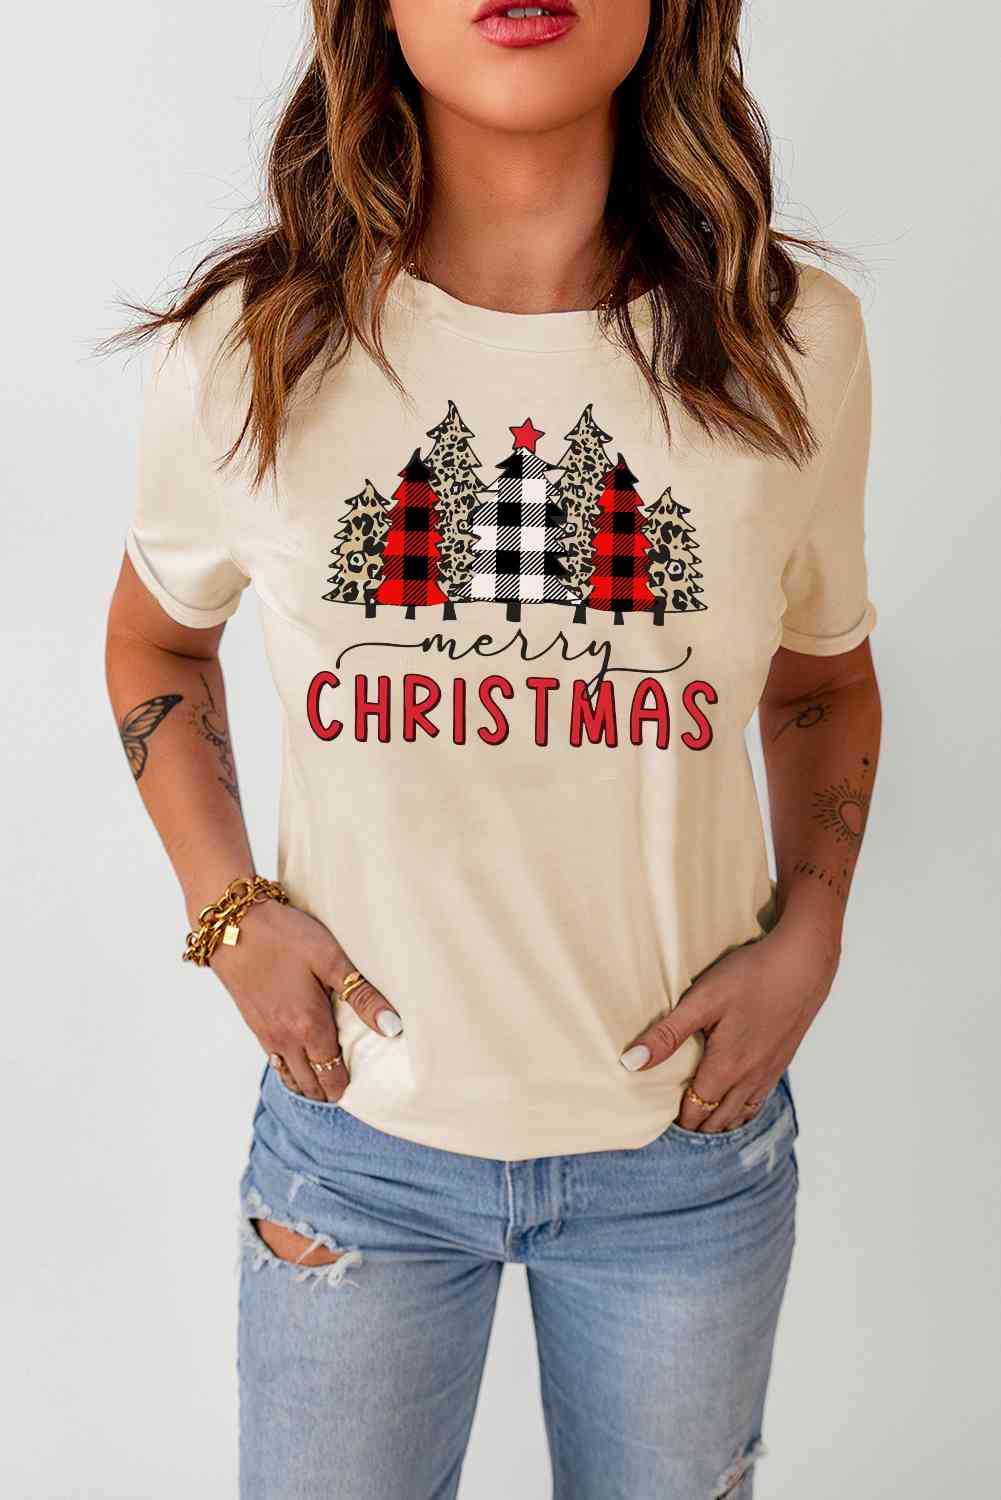 MERRY CHRISTMAS Graphic T-Shirt - Kawaii Stop - Christmas, Christmas T-Shirt, Comfortable Fit, Festive Fashion, Festive Look, Graphic Tee, Holiday Apparel, Holiday Cheer, Holiday Outfit, Seasonal Style, Ship From Overseas, SYNZ, Winter Wardrobe